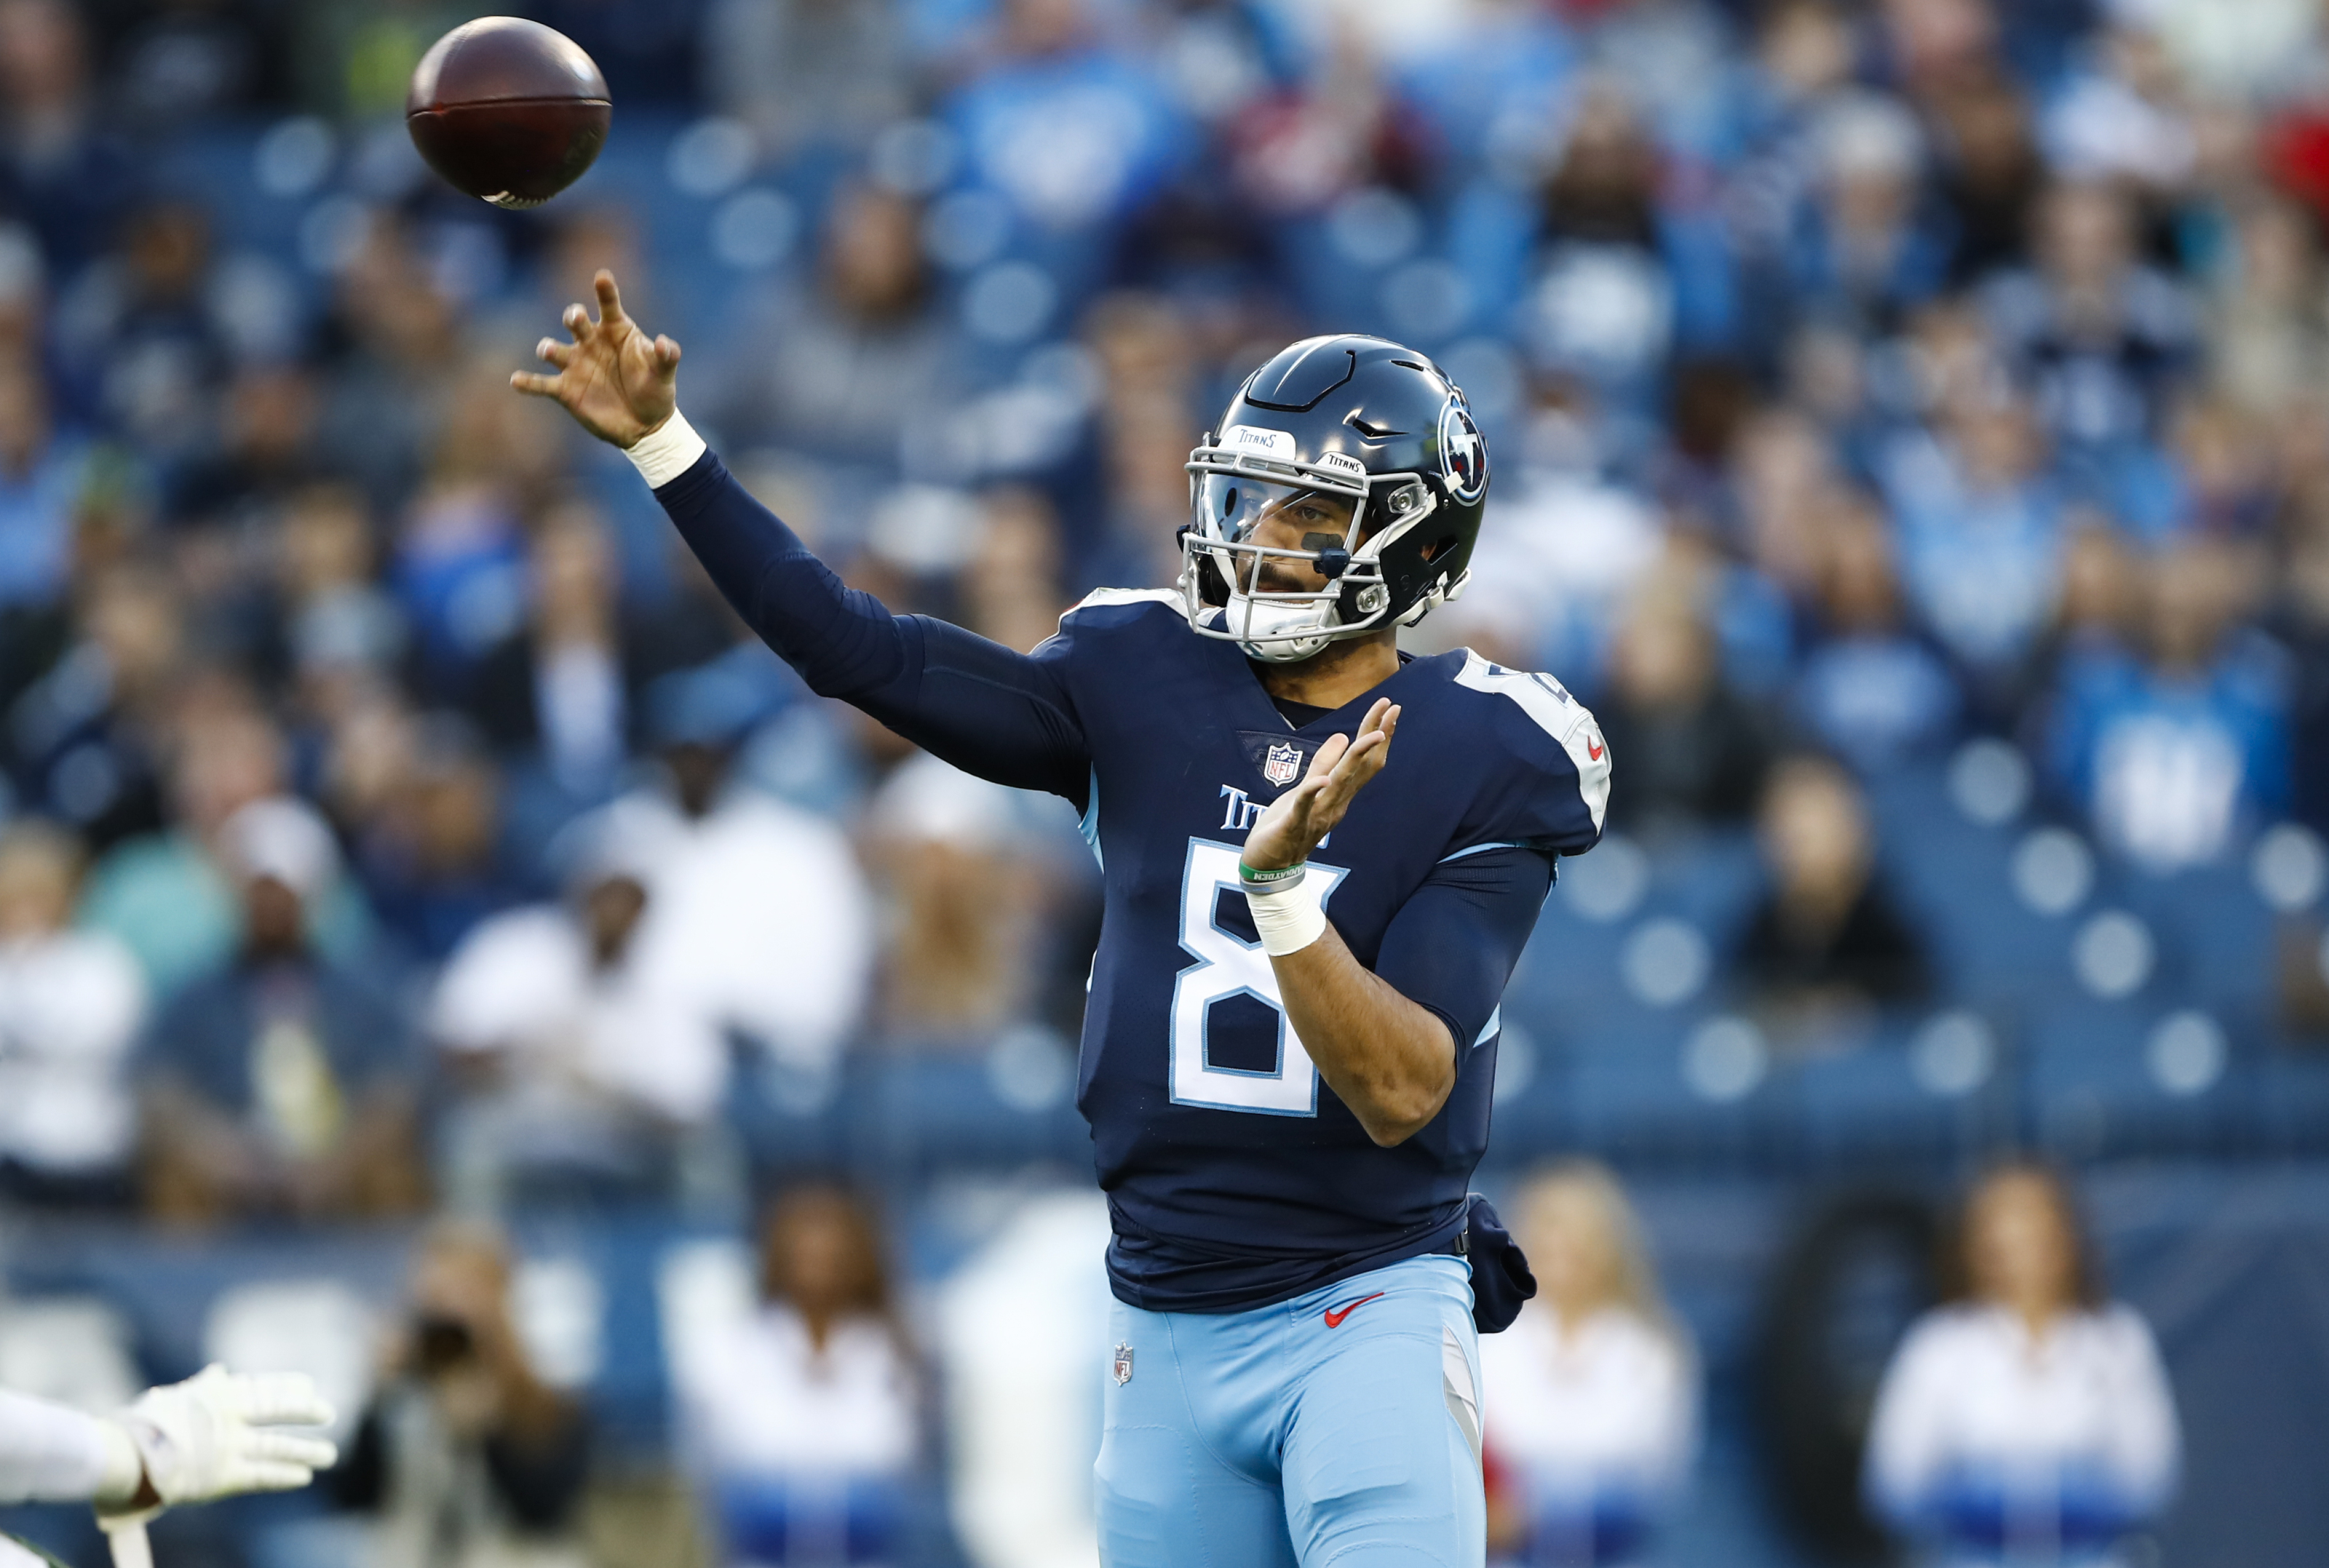 Pro Football Focus feels strongly about former Titans QB Marcus